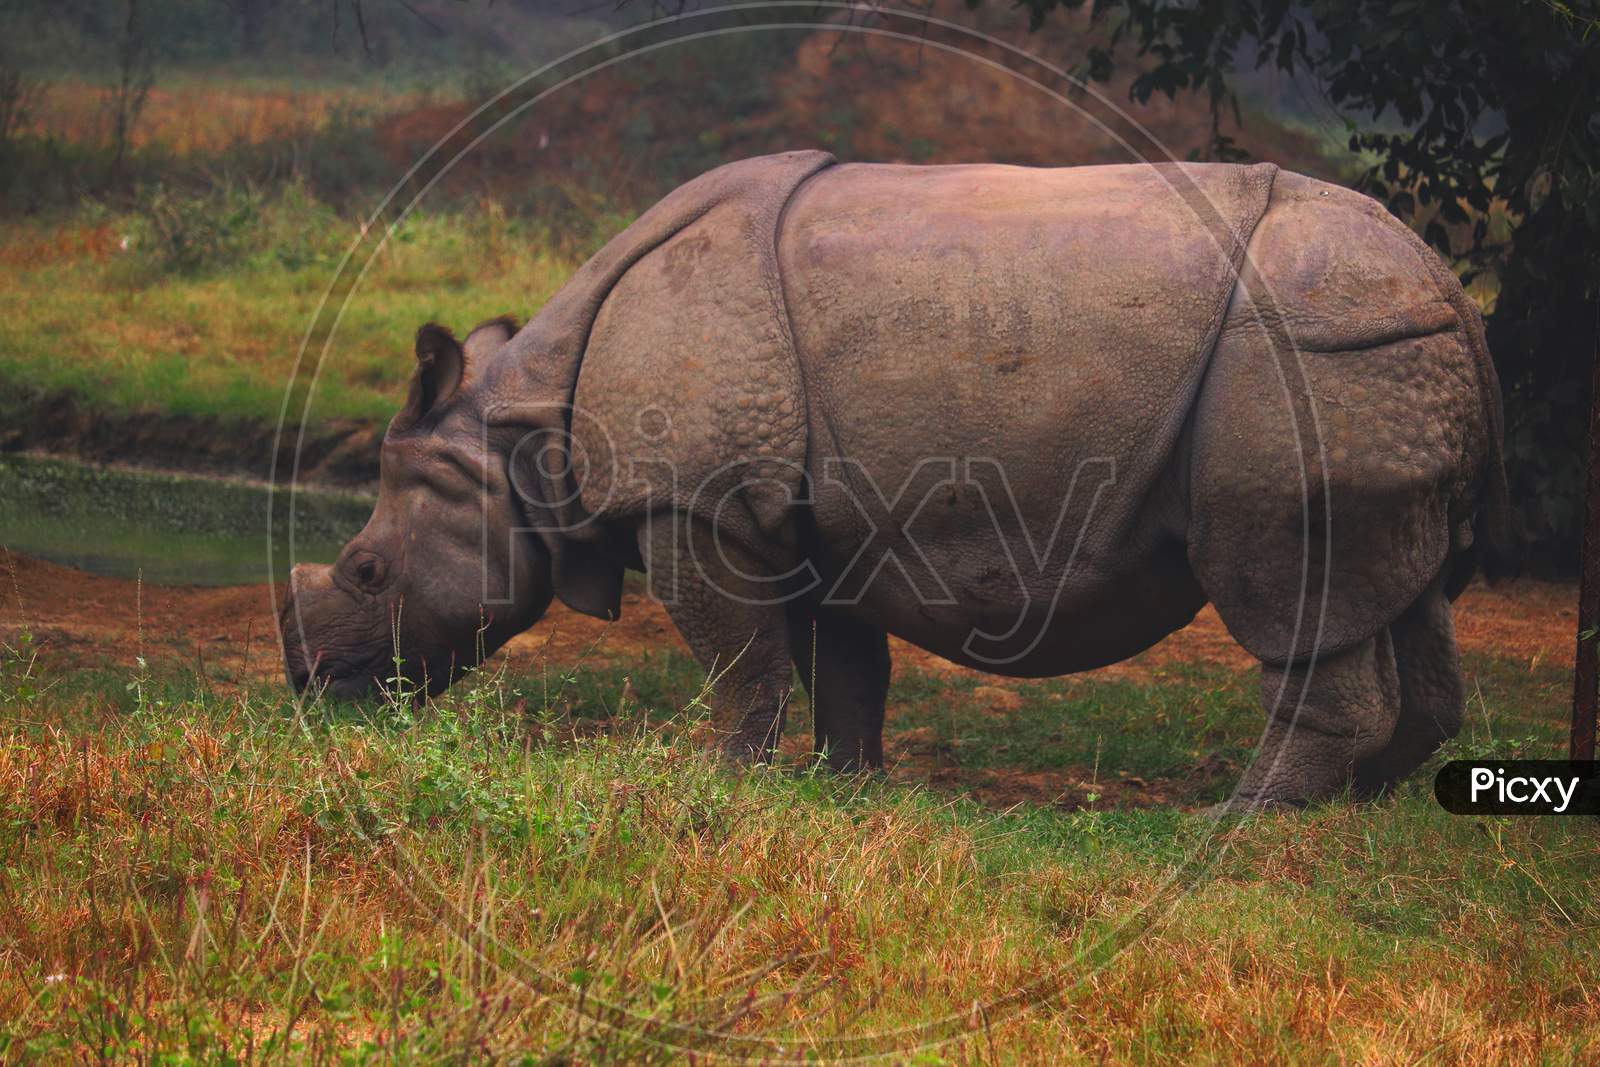 Rhinoceros Eating Grass From Ground